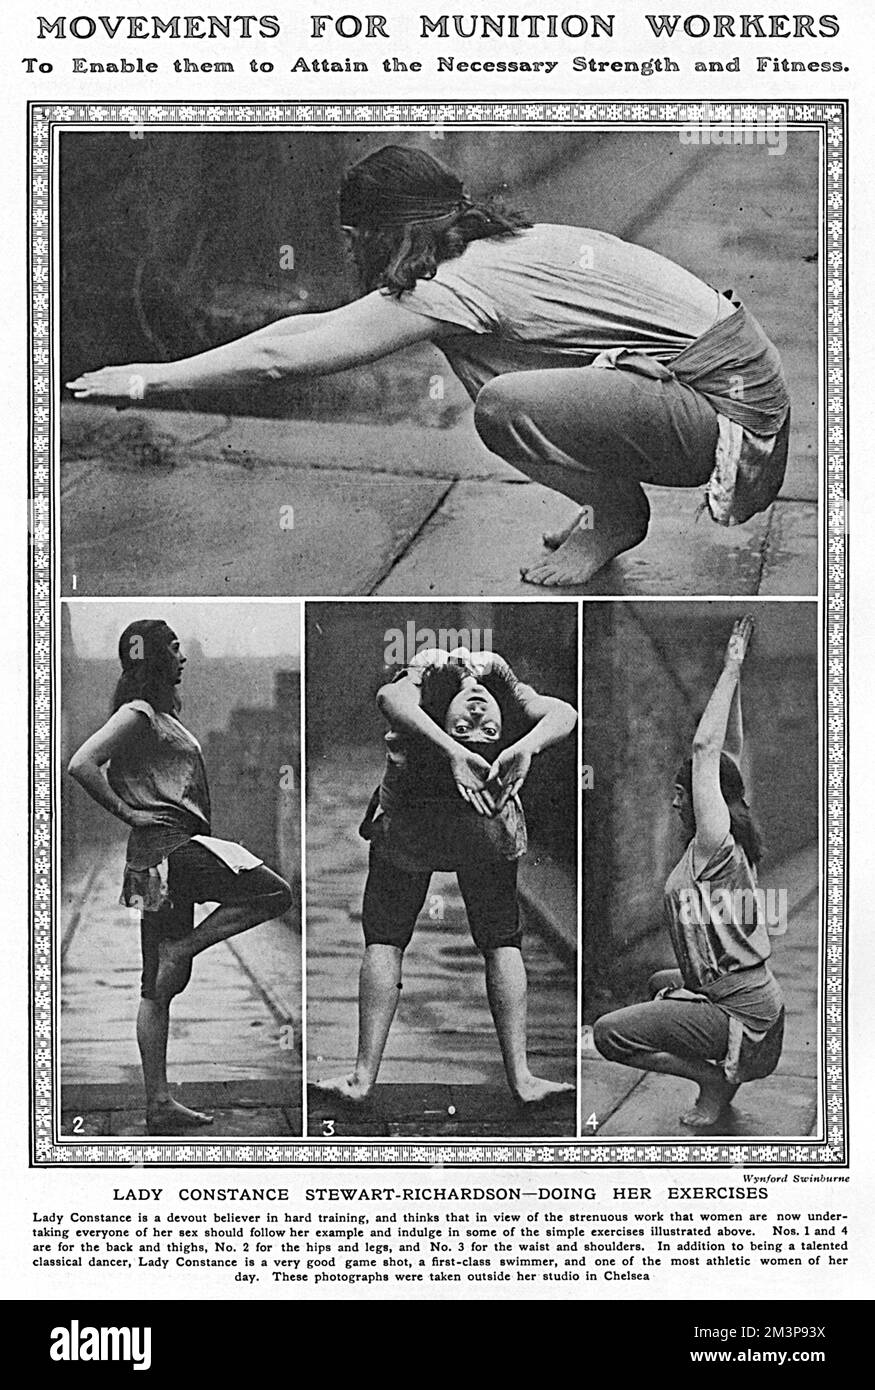 Lady Constance Stewart-Richardson (1883-1932), daughter of the 2nd Earl of Cromartie, society figure, danced and promoter of the healthy benefits of exercise. Her husband, Sir Edward Stewart-Richardson was killed in action in 1914. Lady Constance opened a dance studio in Chelsea and she is pictured outside it demonstrating exercises which would improve the strength and fitness of munition workers.      Date: 1916 Stock Photo